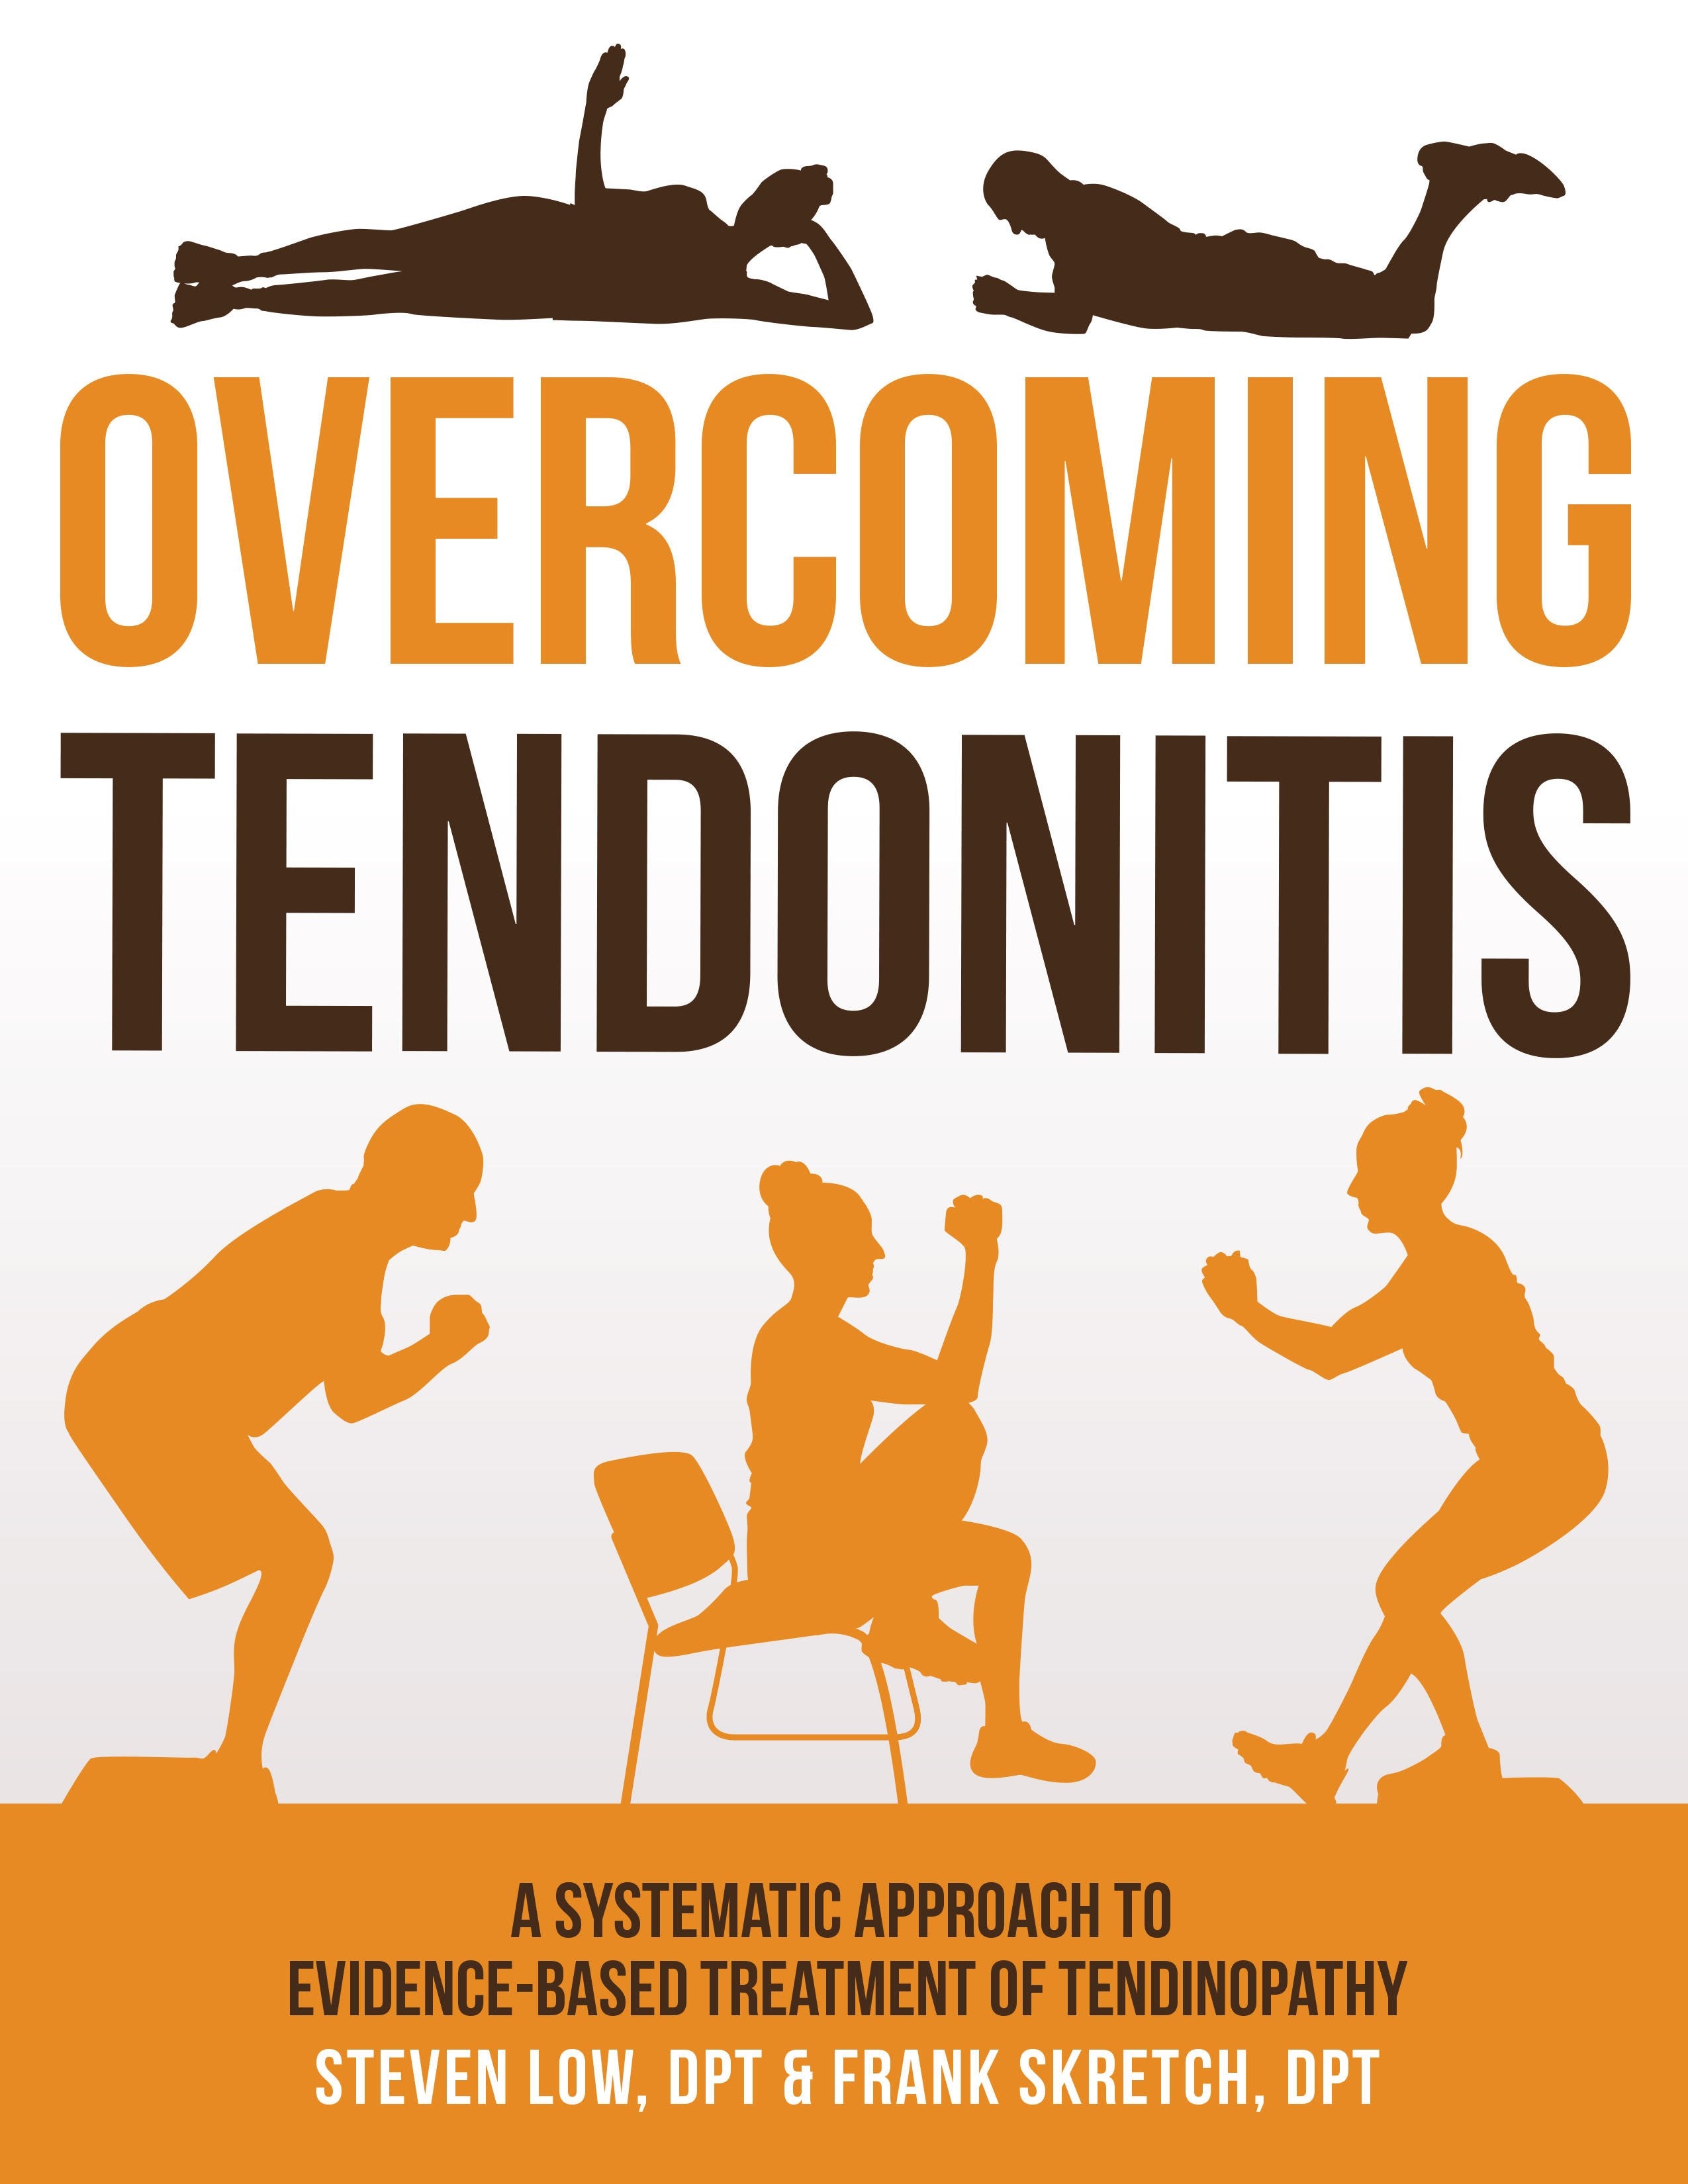 Overcoming tendonitis by Steven Low - Atomic Iron